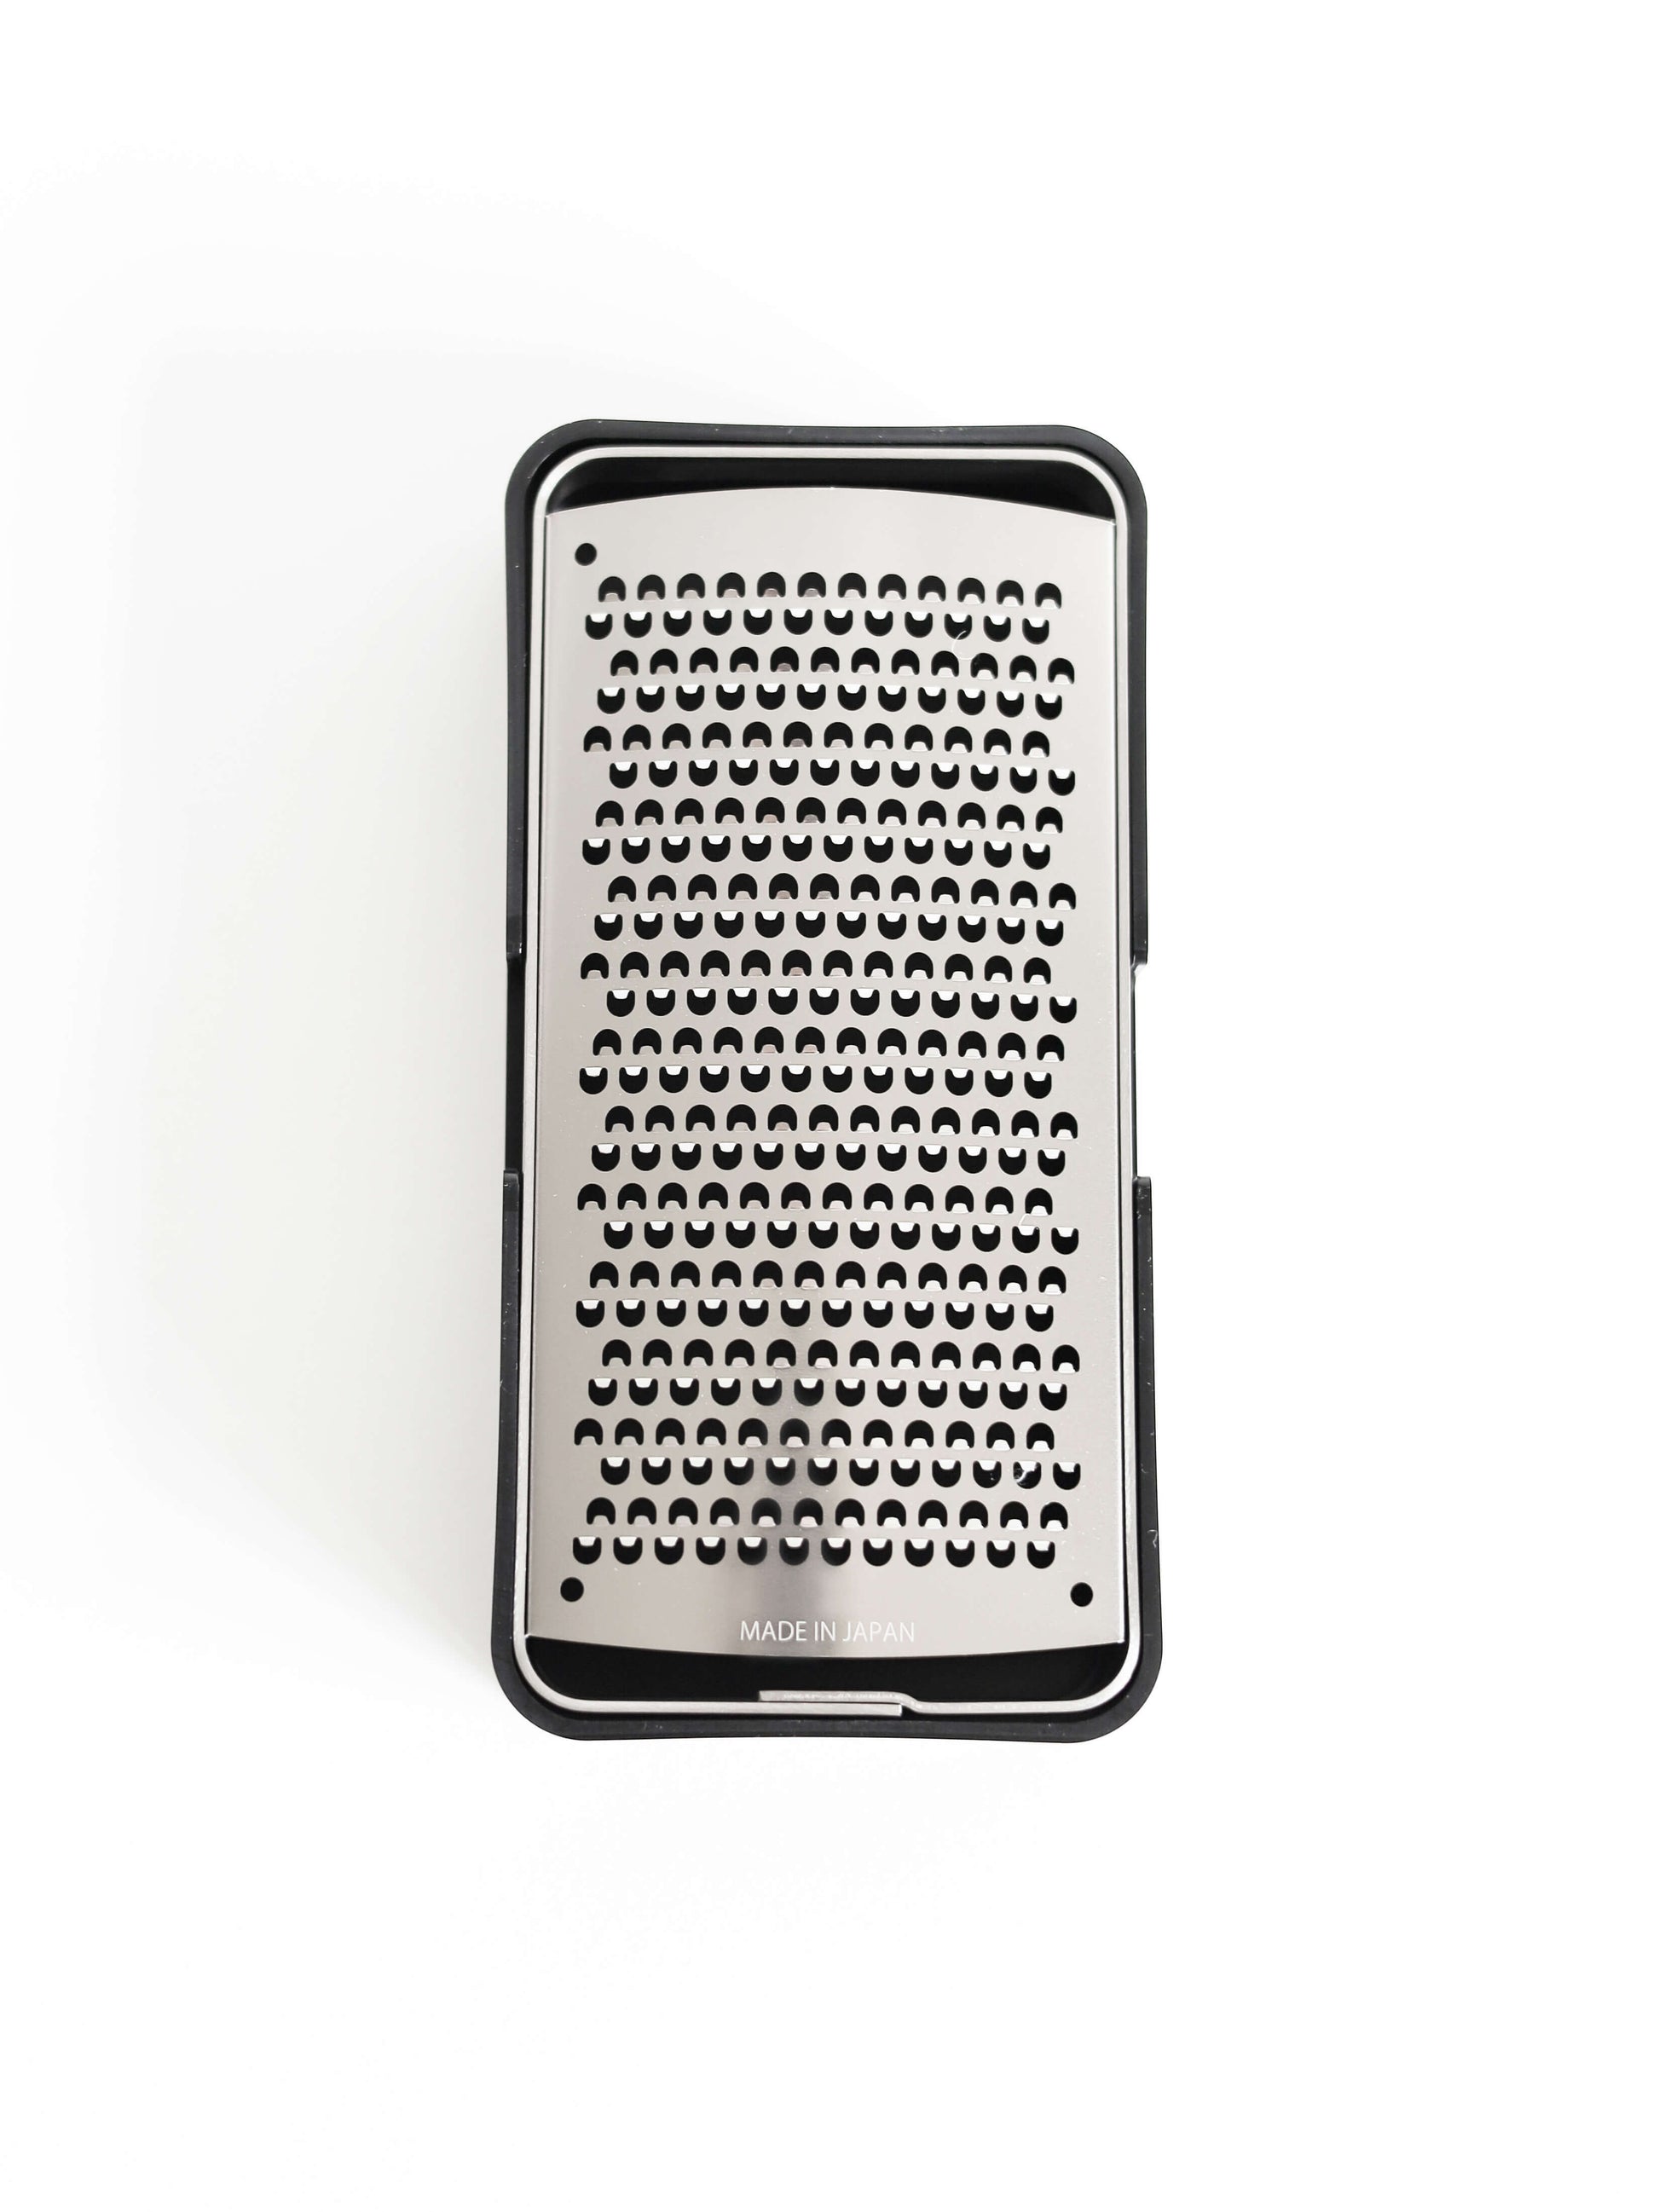 stainless-steel-ever-grater-1